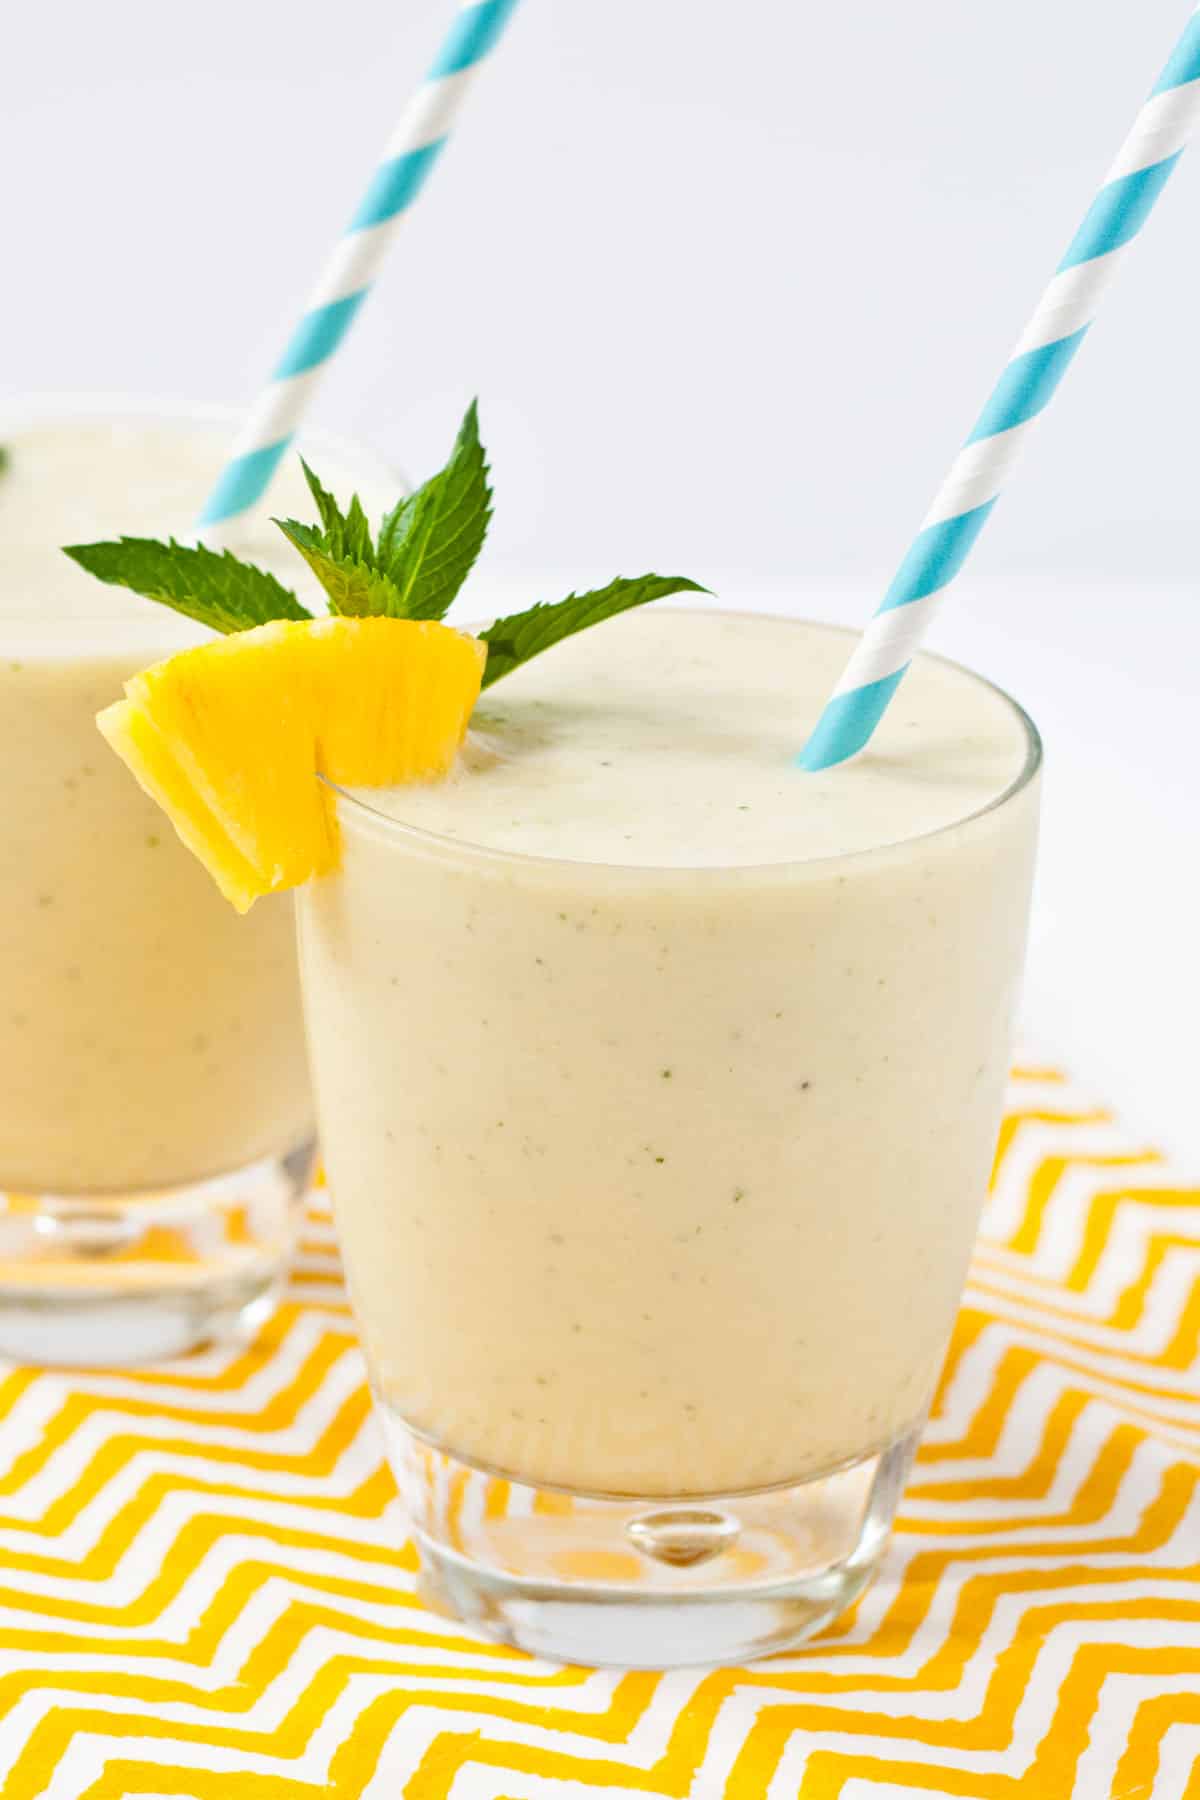 Banana and pineapple smoothie in a glass with a blue and white paper straw.